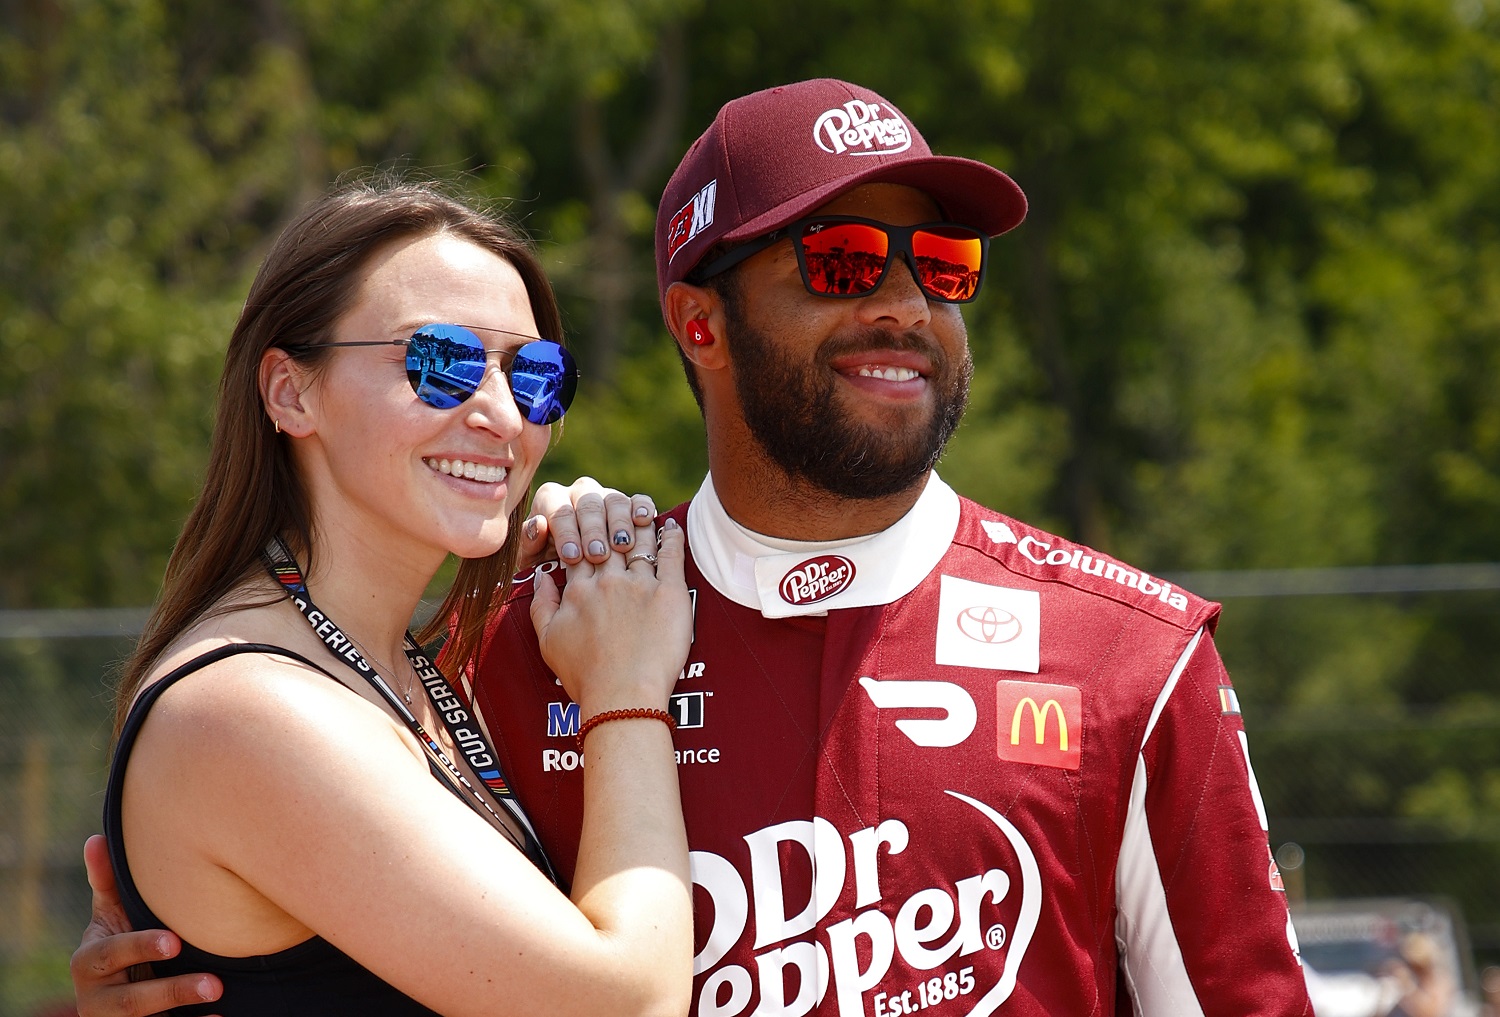 Bubba Wallace and Amanda Carter pose for photos on the grid prior to the NASCAR Cup Series Jockey Made in America 250 at Road America on July 4, 2021. | Jared C. Tilton/23XI Racing via Getty Images